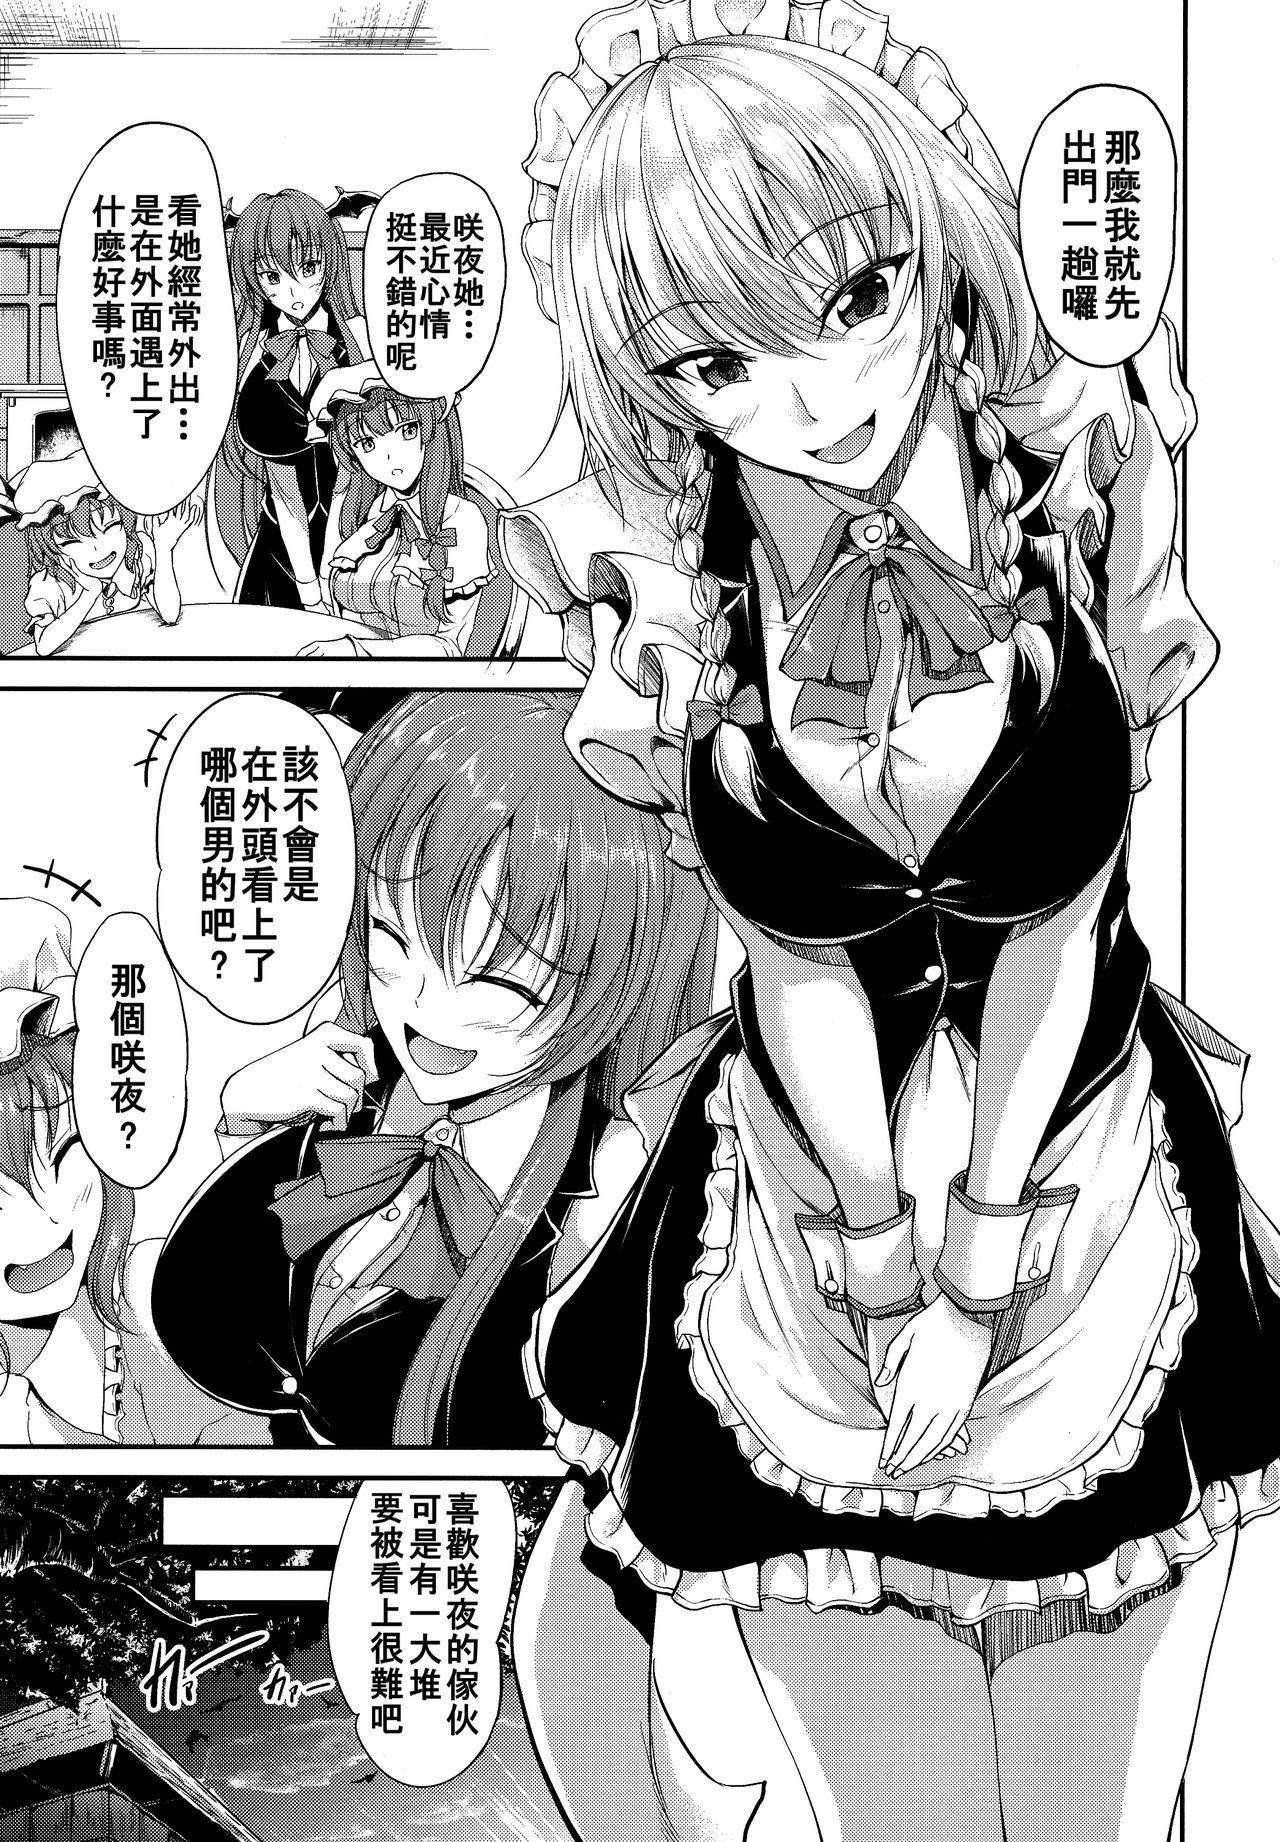 Load Koumakan no Itazura Maid after - Touhou project Tight - Page 3